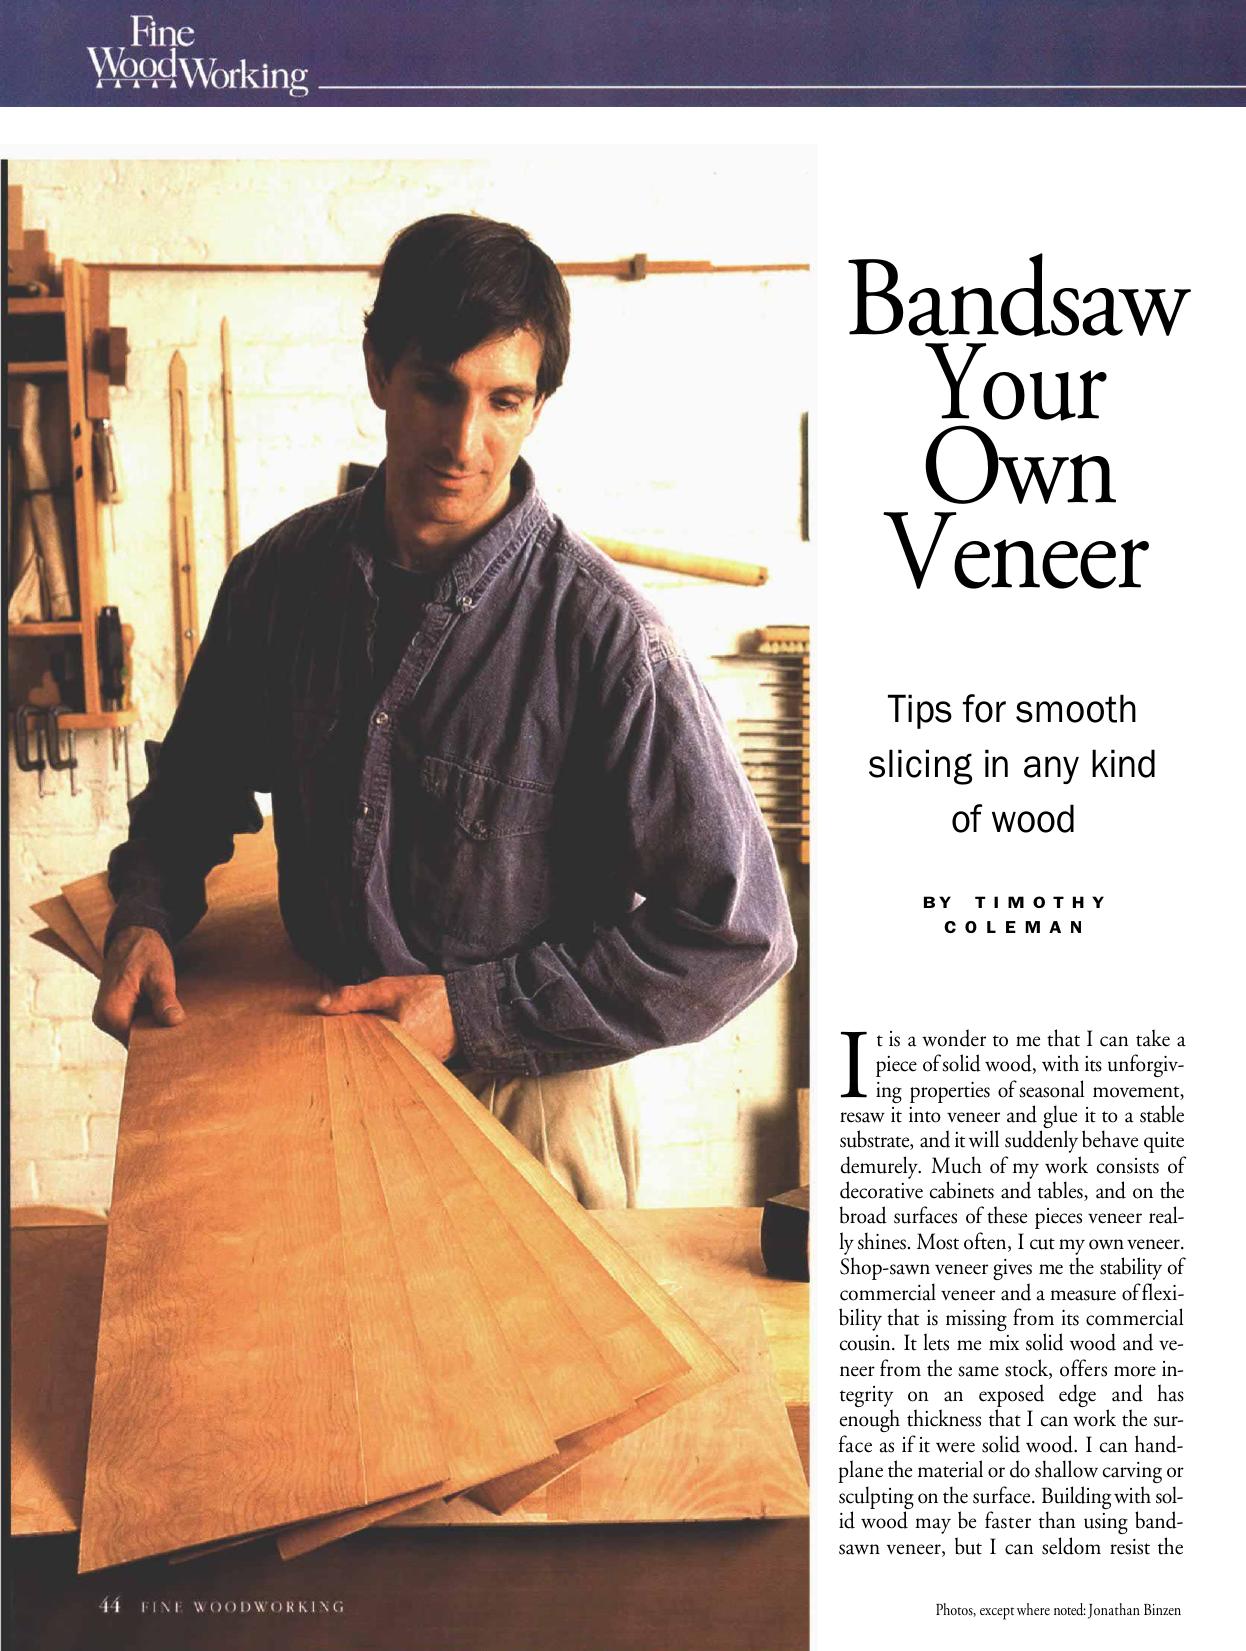 Bandsaw Your Own Veneer by Timothy Coleman